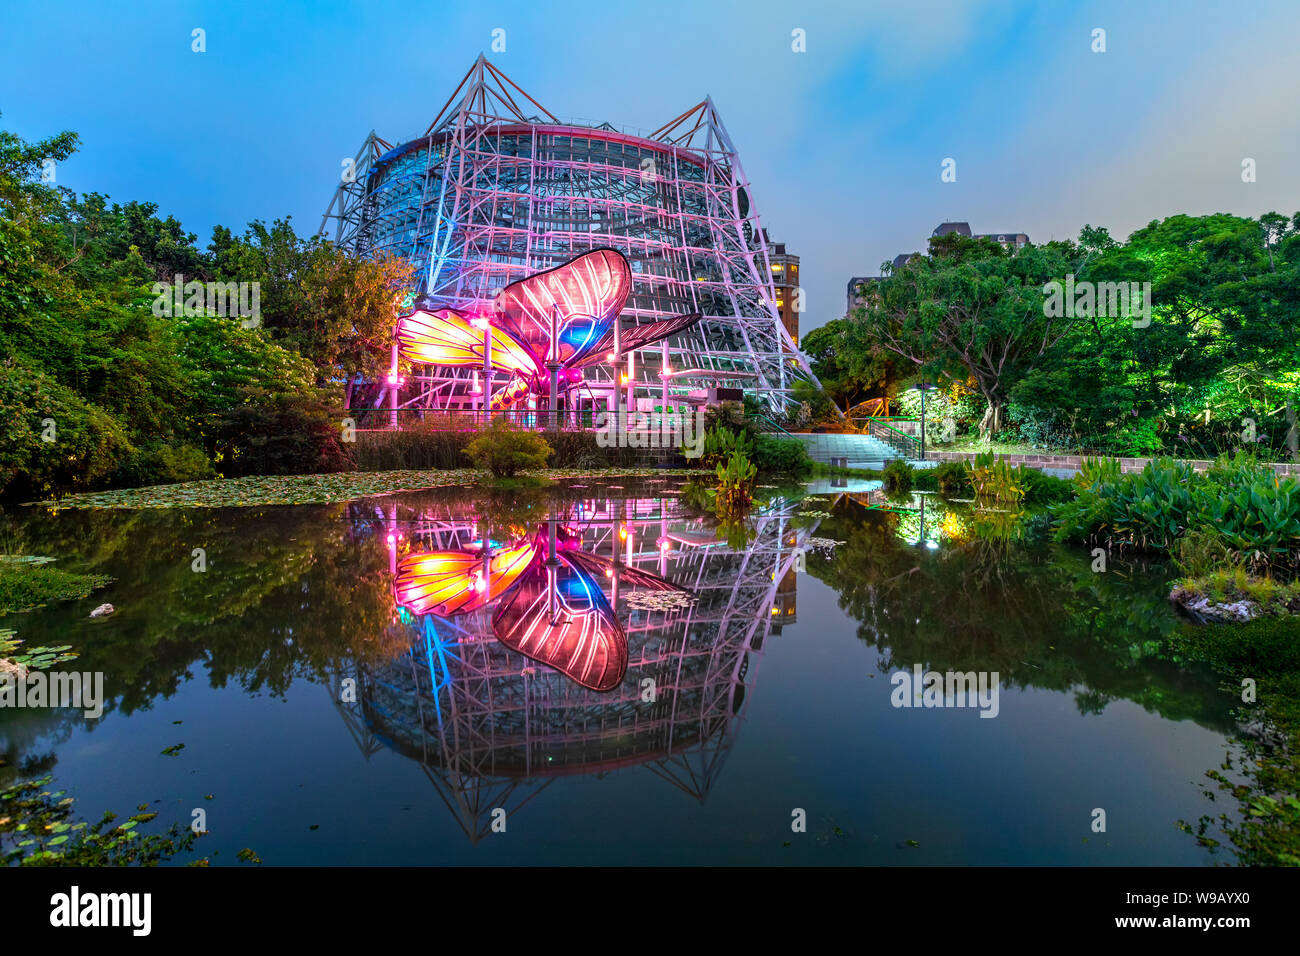 Taichung, Taiwan - June 16, 2018: The tropical Rain Forest Greenhouse near National Museum of Natural Science in taichung Stock Photo